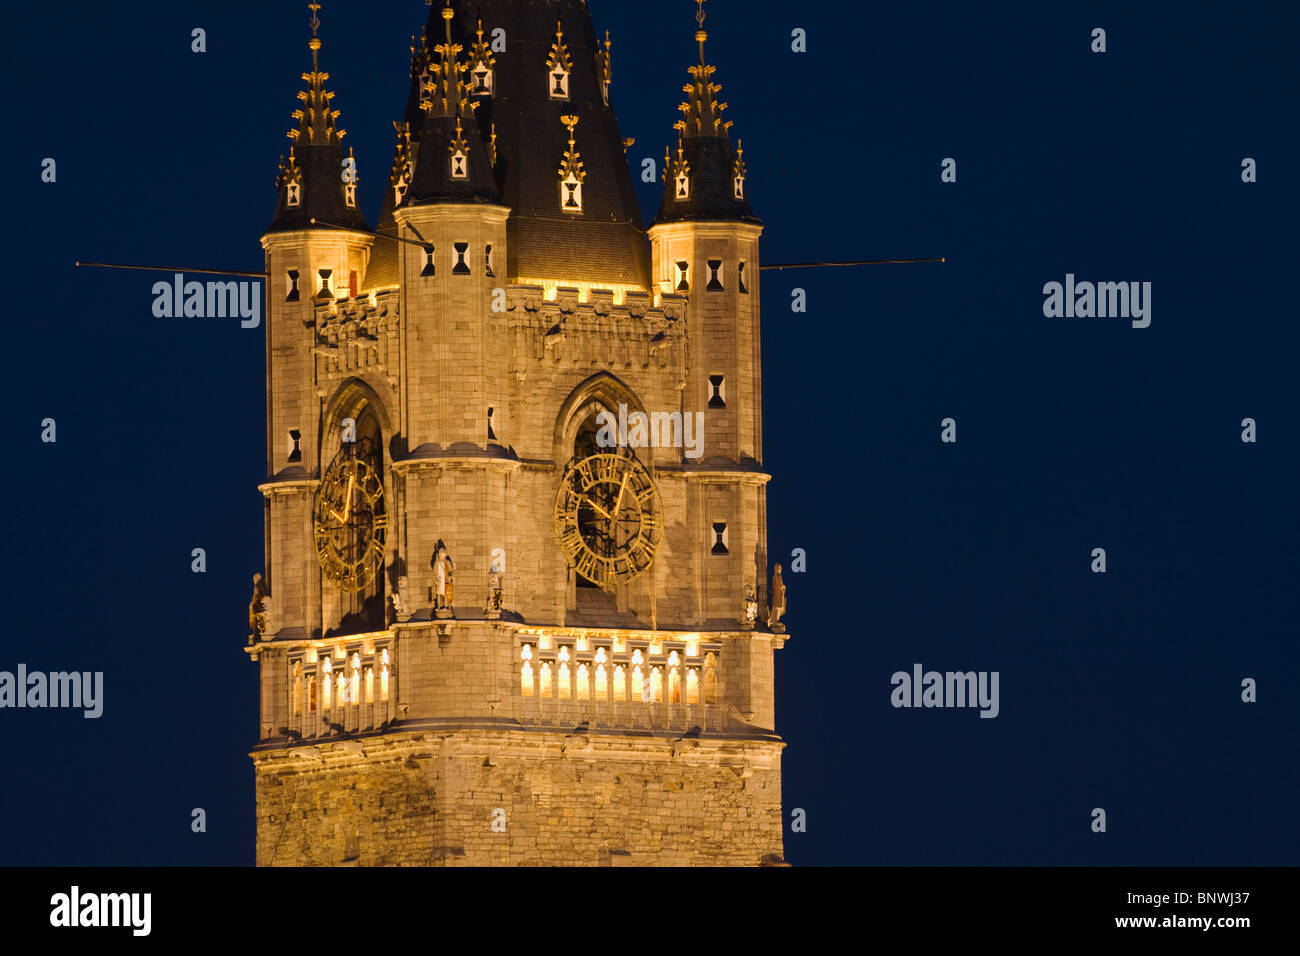 Belgium, Ghent, St Bavos Cathedral at night, Sint Baafskathedraal Stock Photo